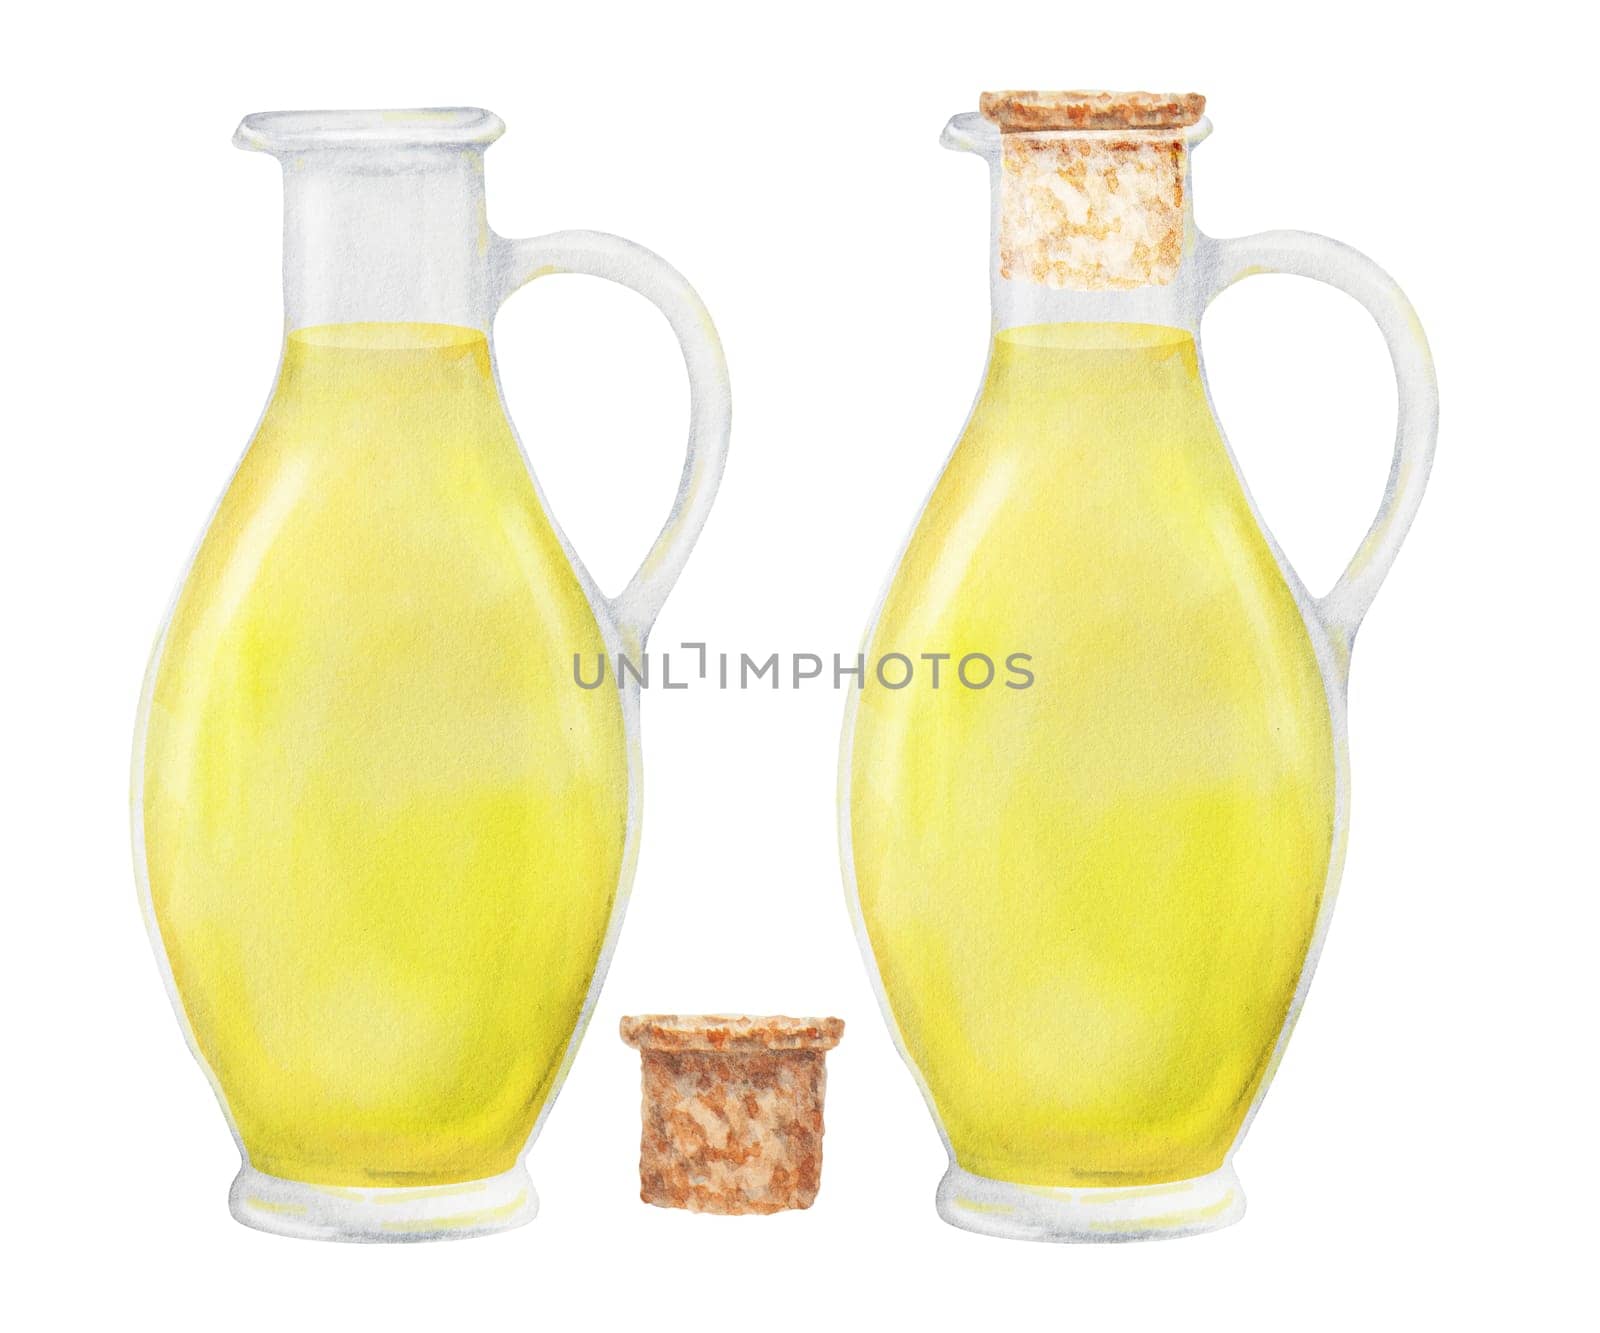 Transparent white glass bottle with yellow oil, vinegar. Watercolor hand drawn illustration. Ingredient in cooking, cosmetics. Clip art for menu of restaurants, packaging of farm goods, vegan products